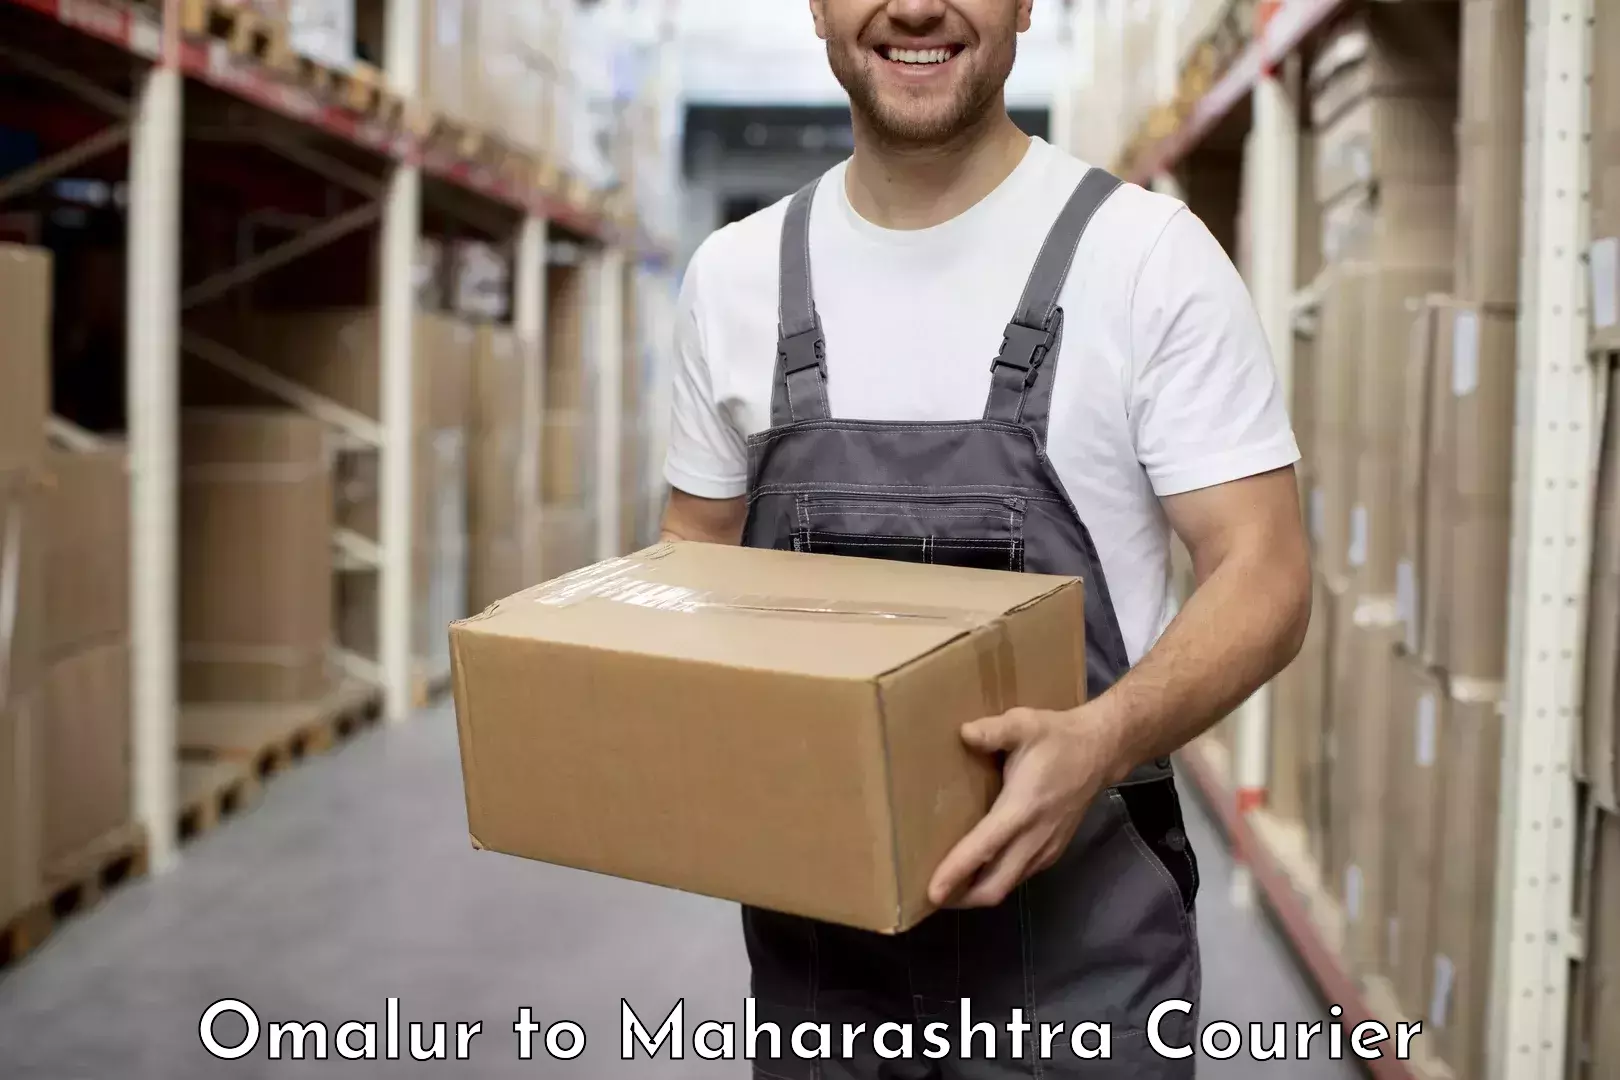 Professional courier handling Omalur to Alephata